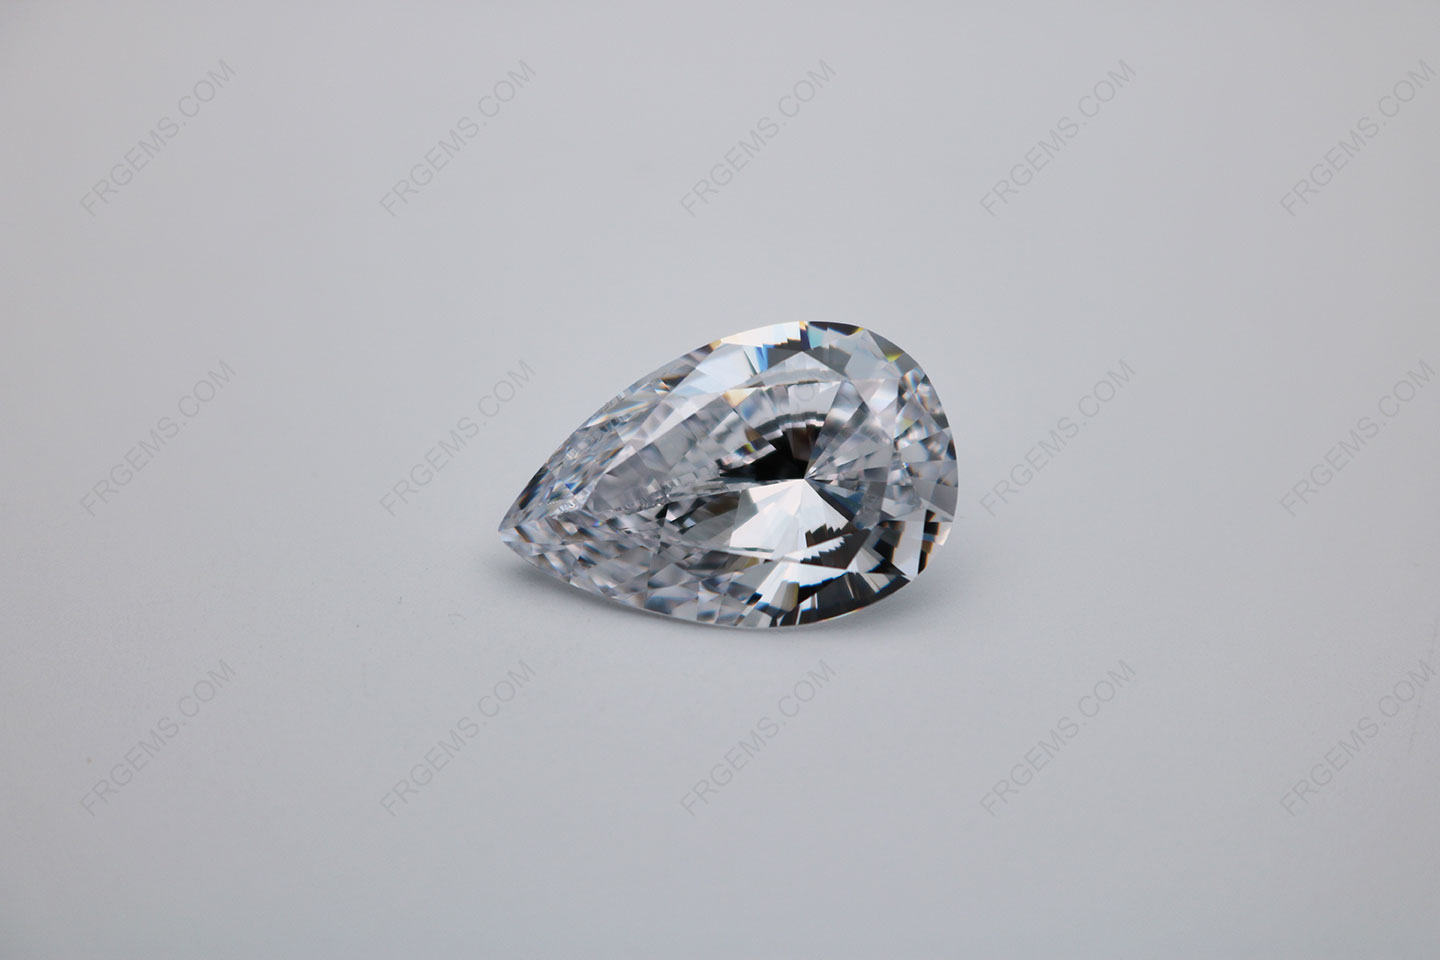 Cubic_Zirconia_White_Color_5A_Best_Quality_Pear_Shape_faceted_Cut_15x10mm_stones_Supplier_IMG_0565